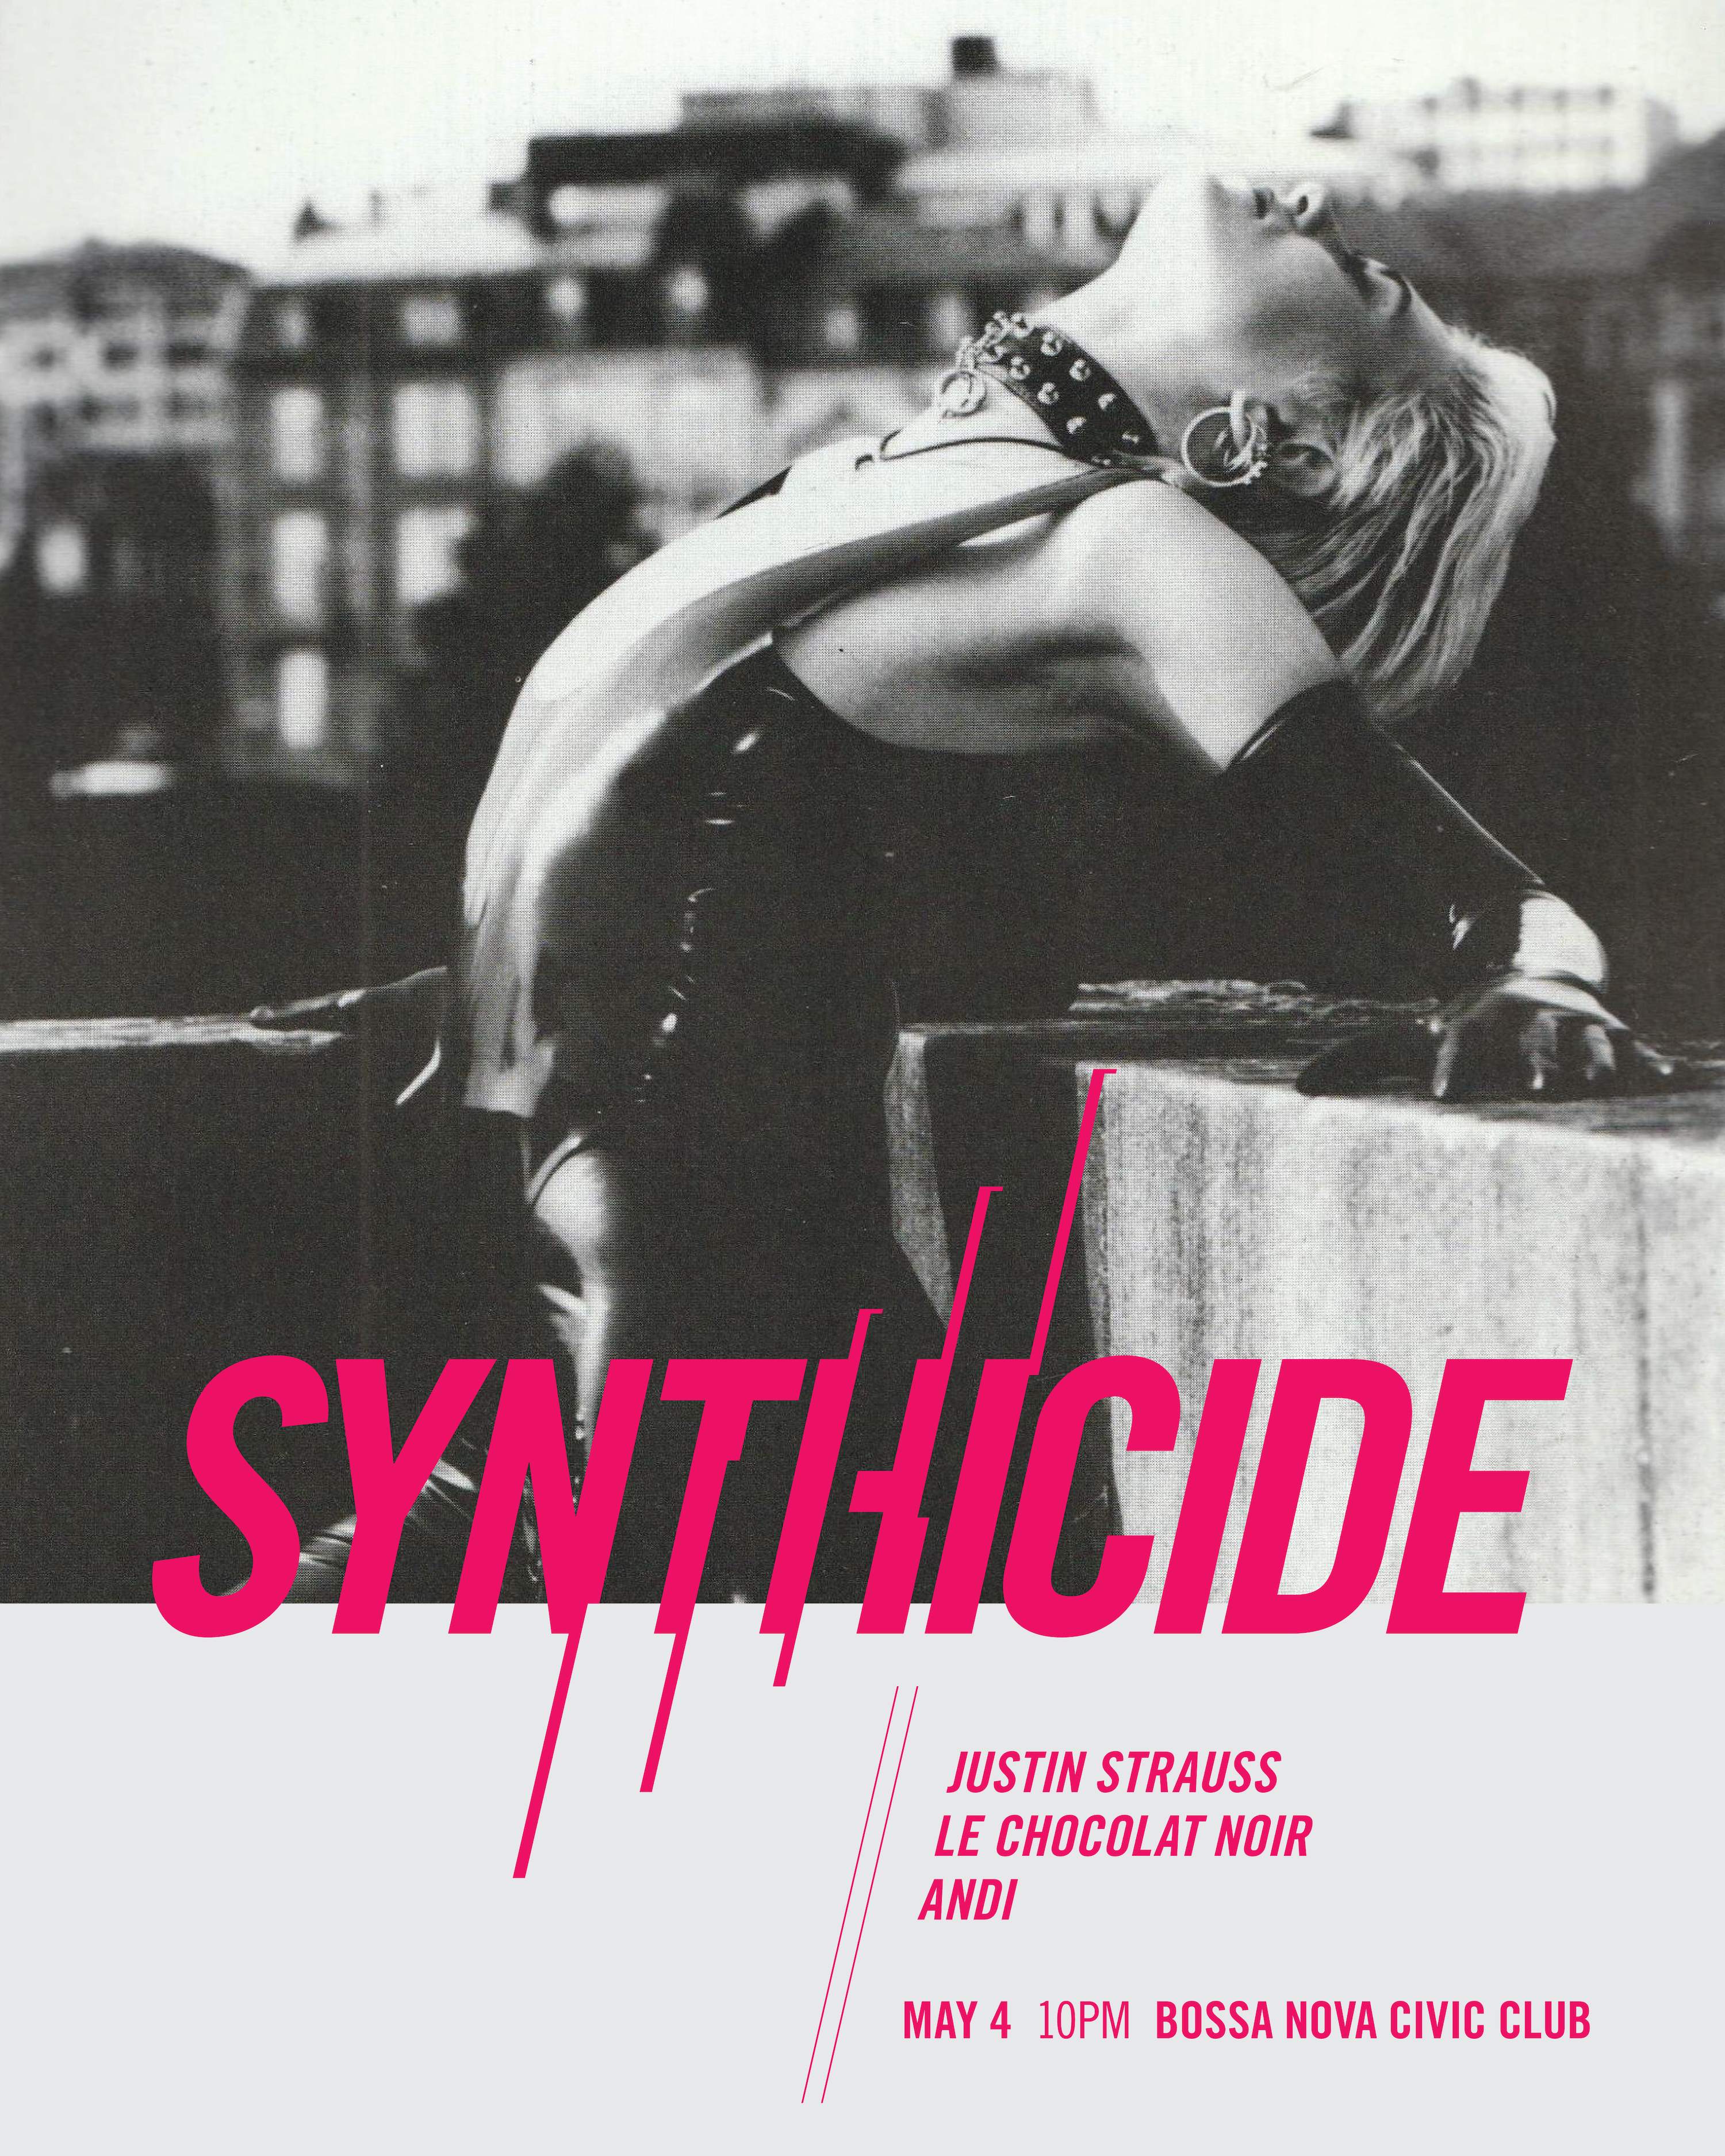 Synthicide with Justin Strauss, Le Chocolat Noir, Andi - フライヤー表